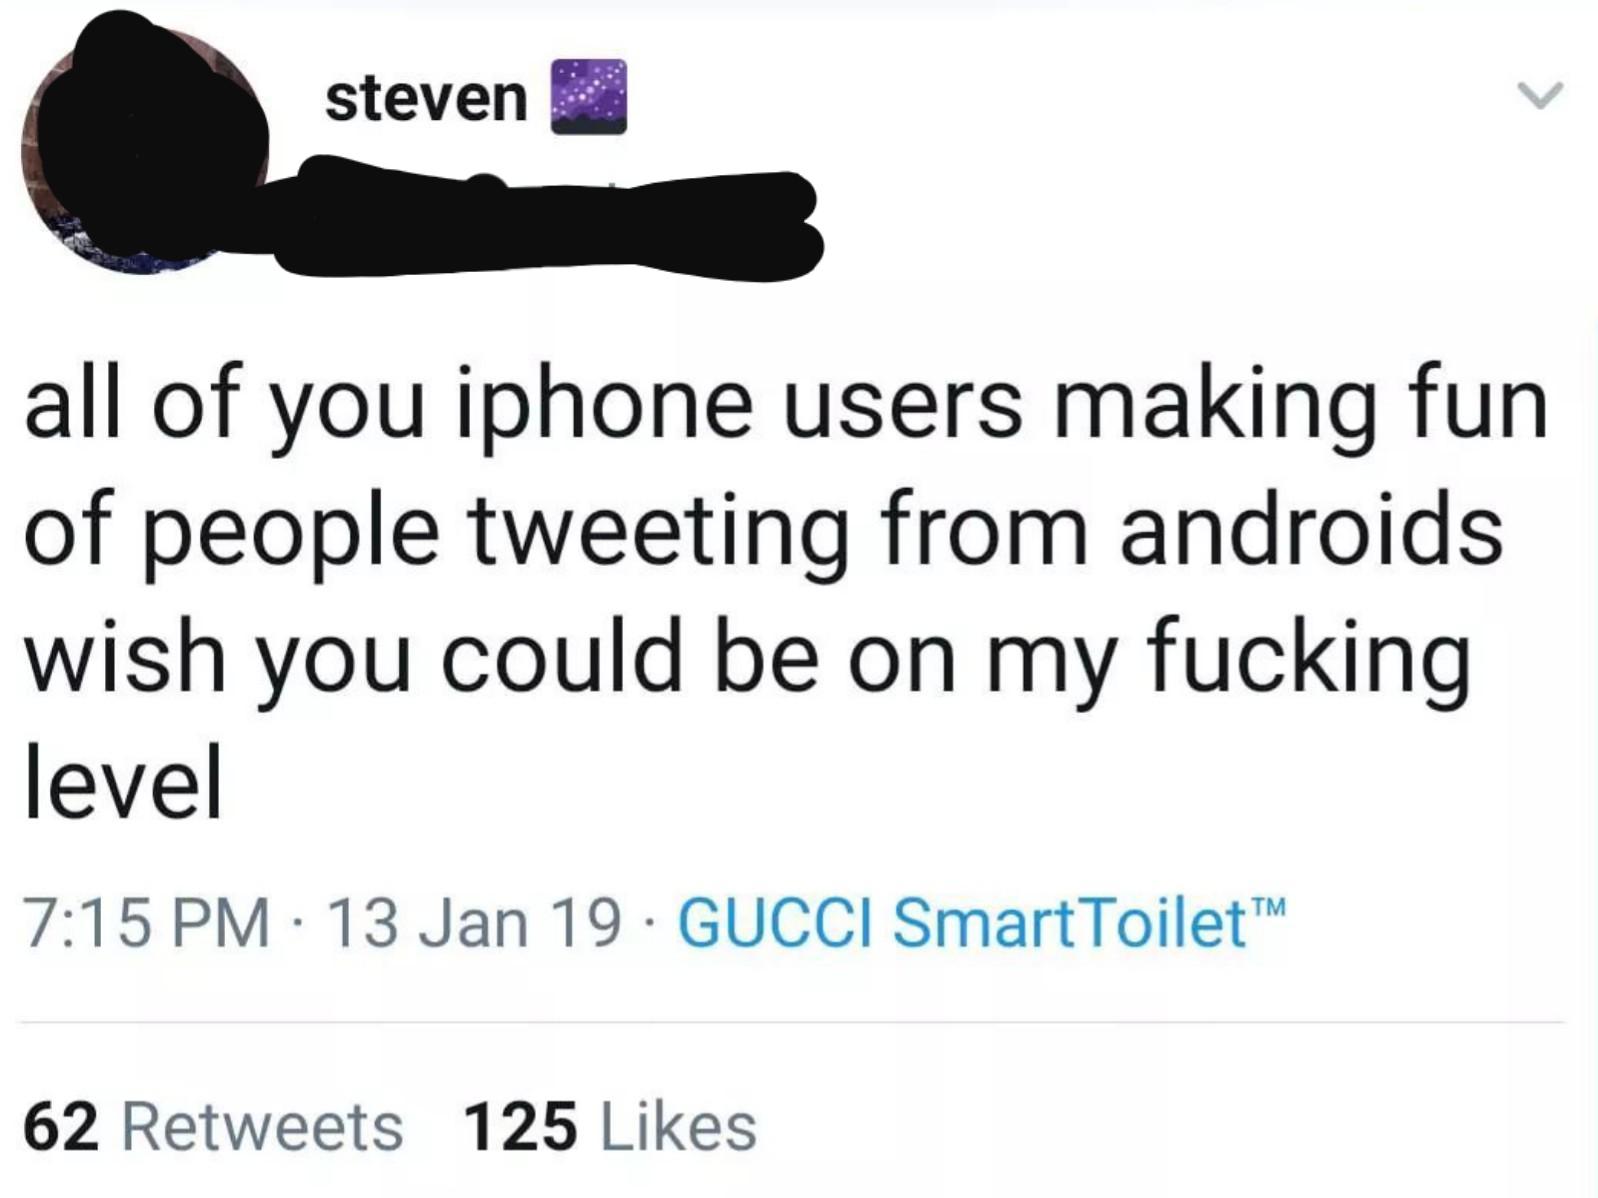 Gucci Smart Toilet reporting for dooty.